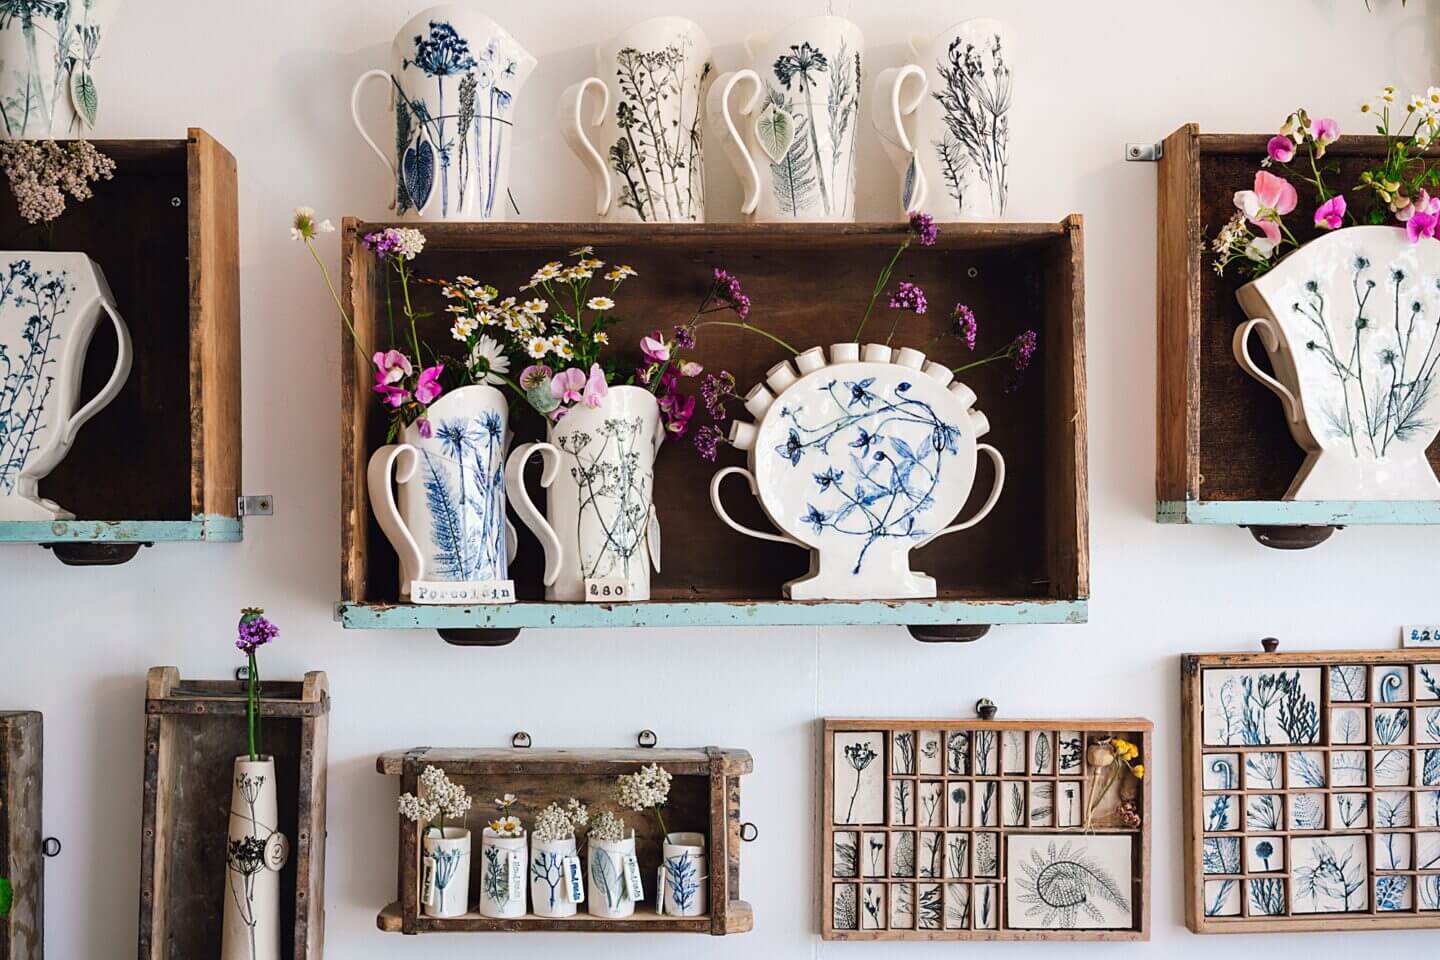 Vases and pots using ceramics to imprint flowers